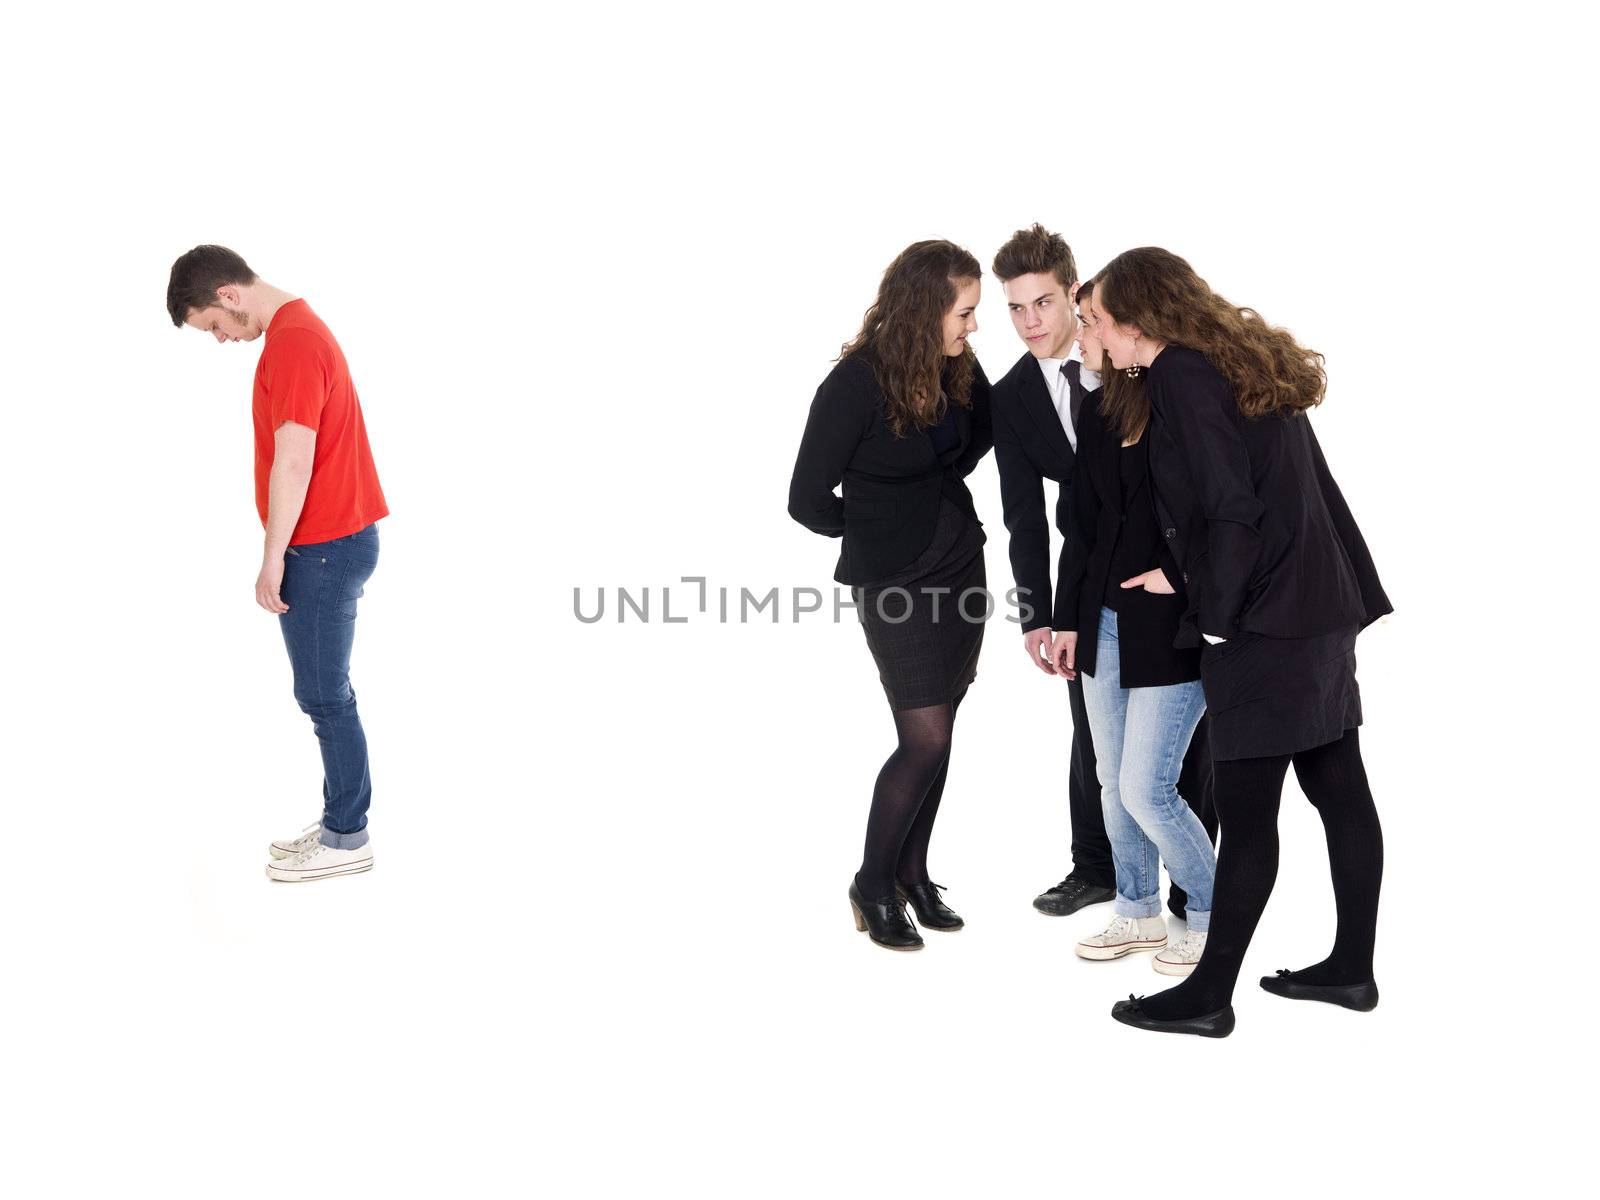 Young man rejected from the group isolated on white background